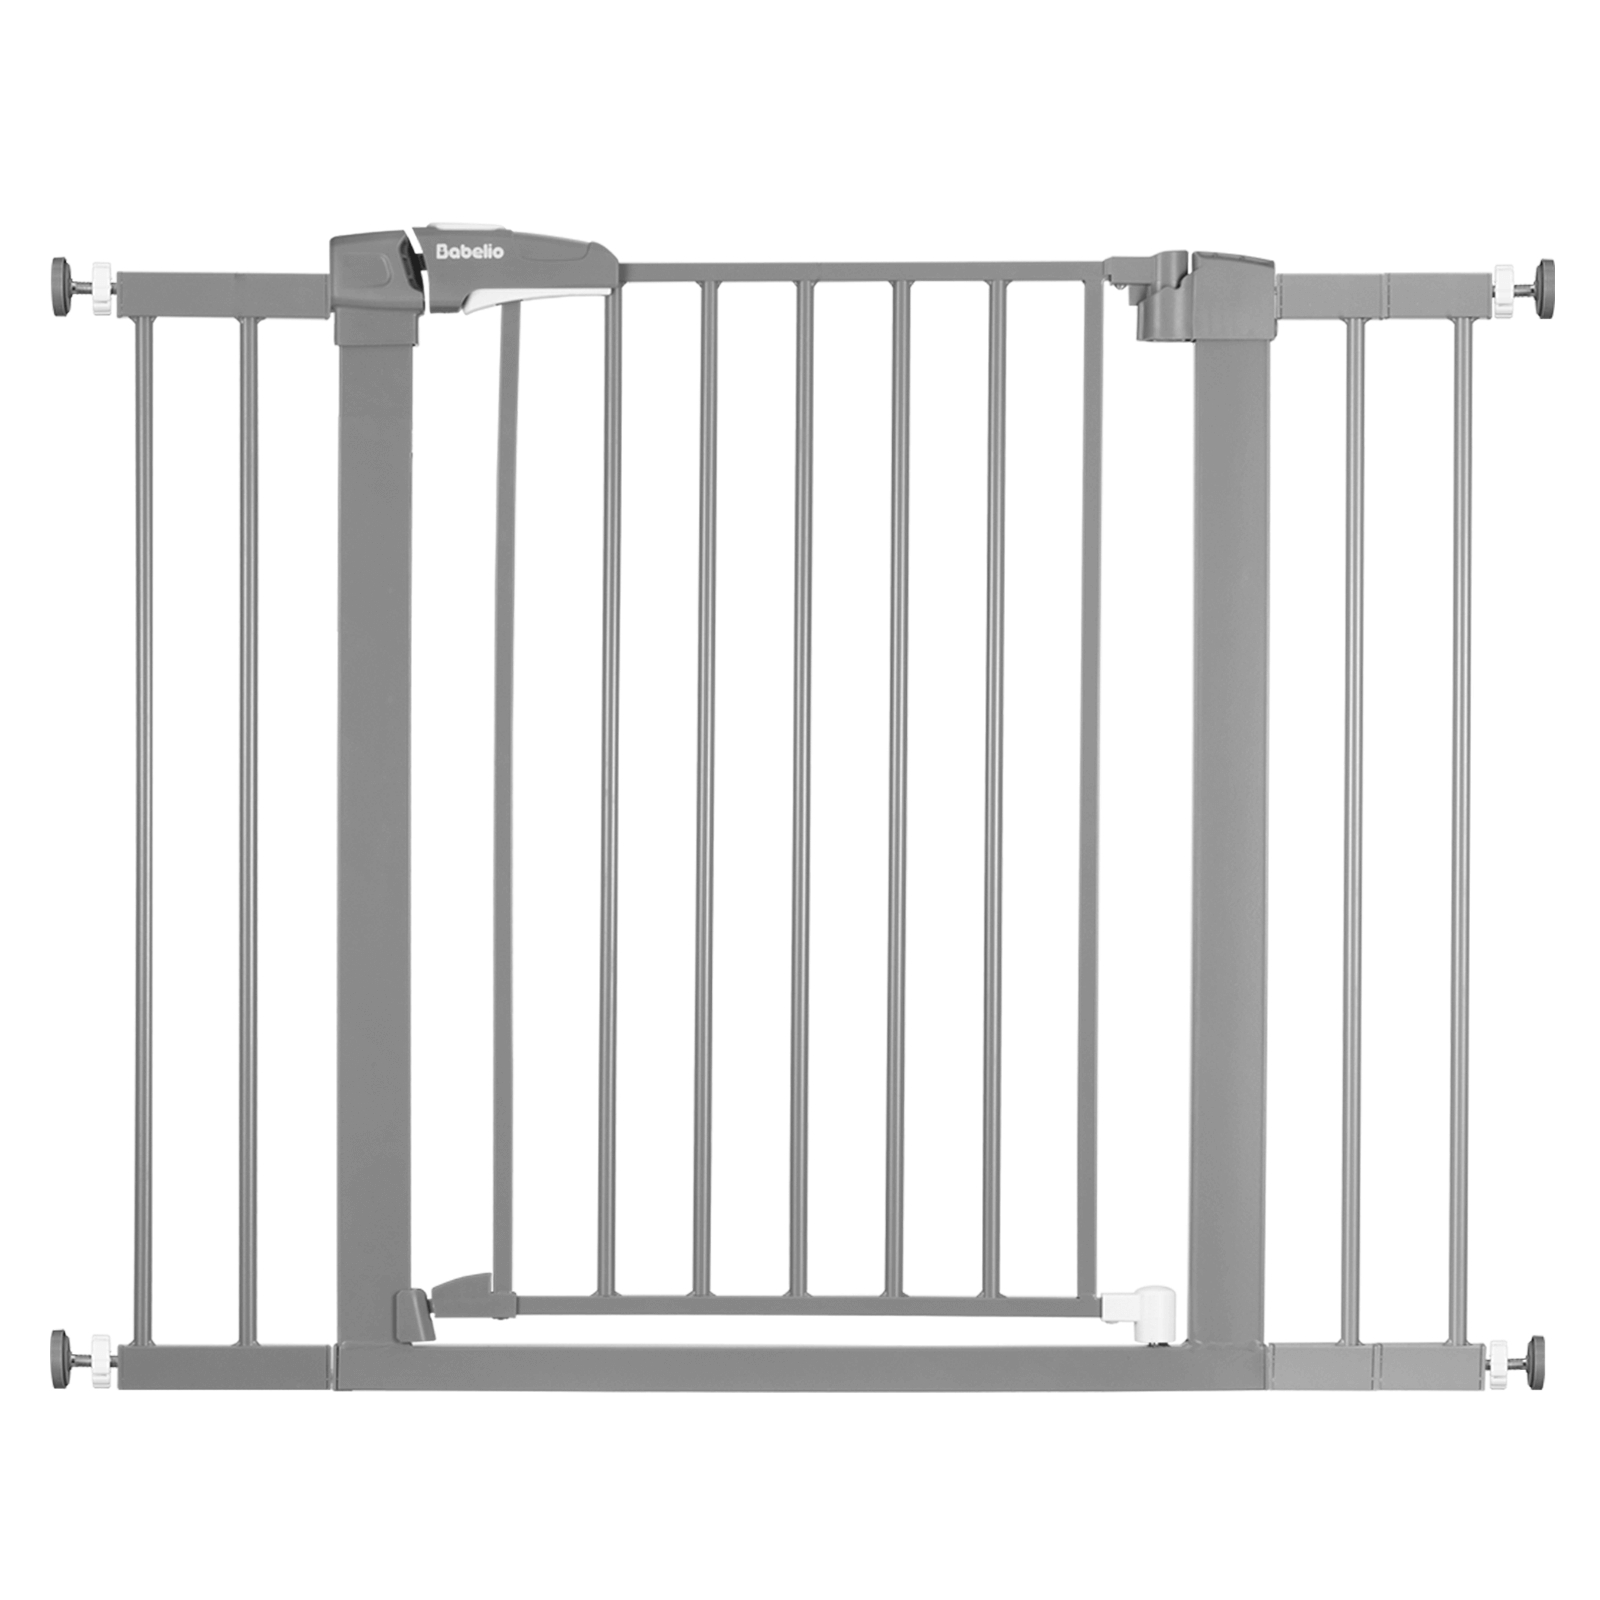 Babelio Adjustable 26-40" Metal Baby/Pet Gate – 30" High, Easy Install, Auto-Close, Versatile Fit for Doorways and Stairs